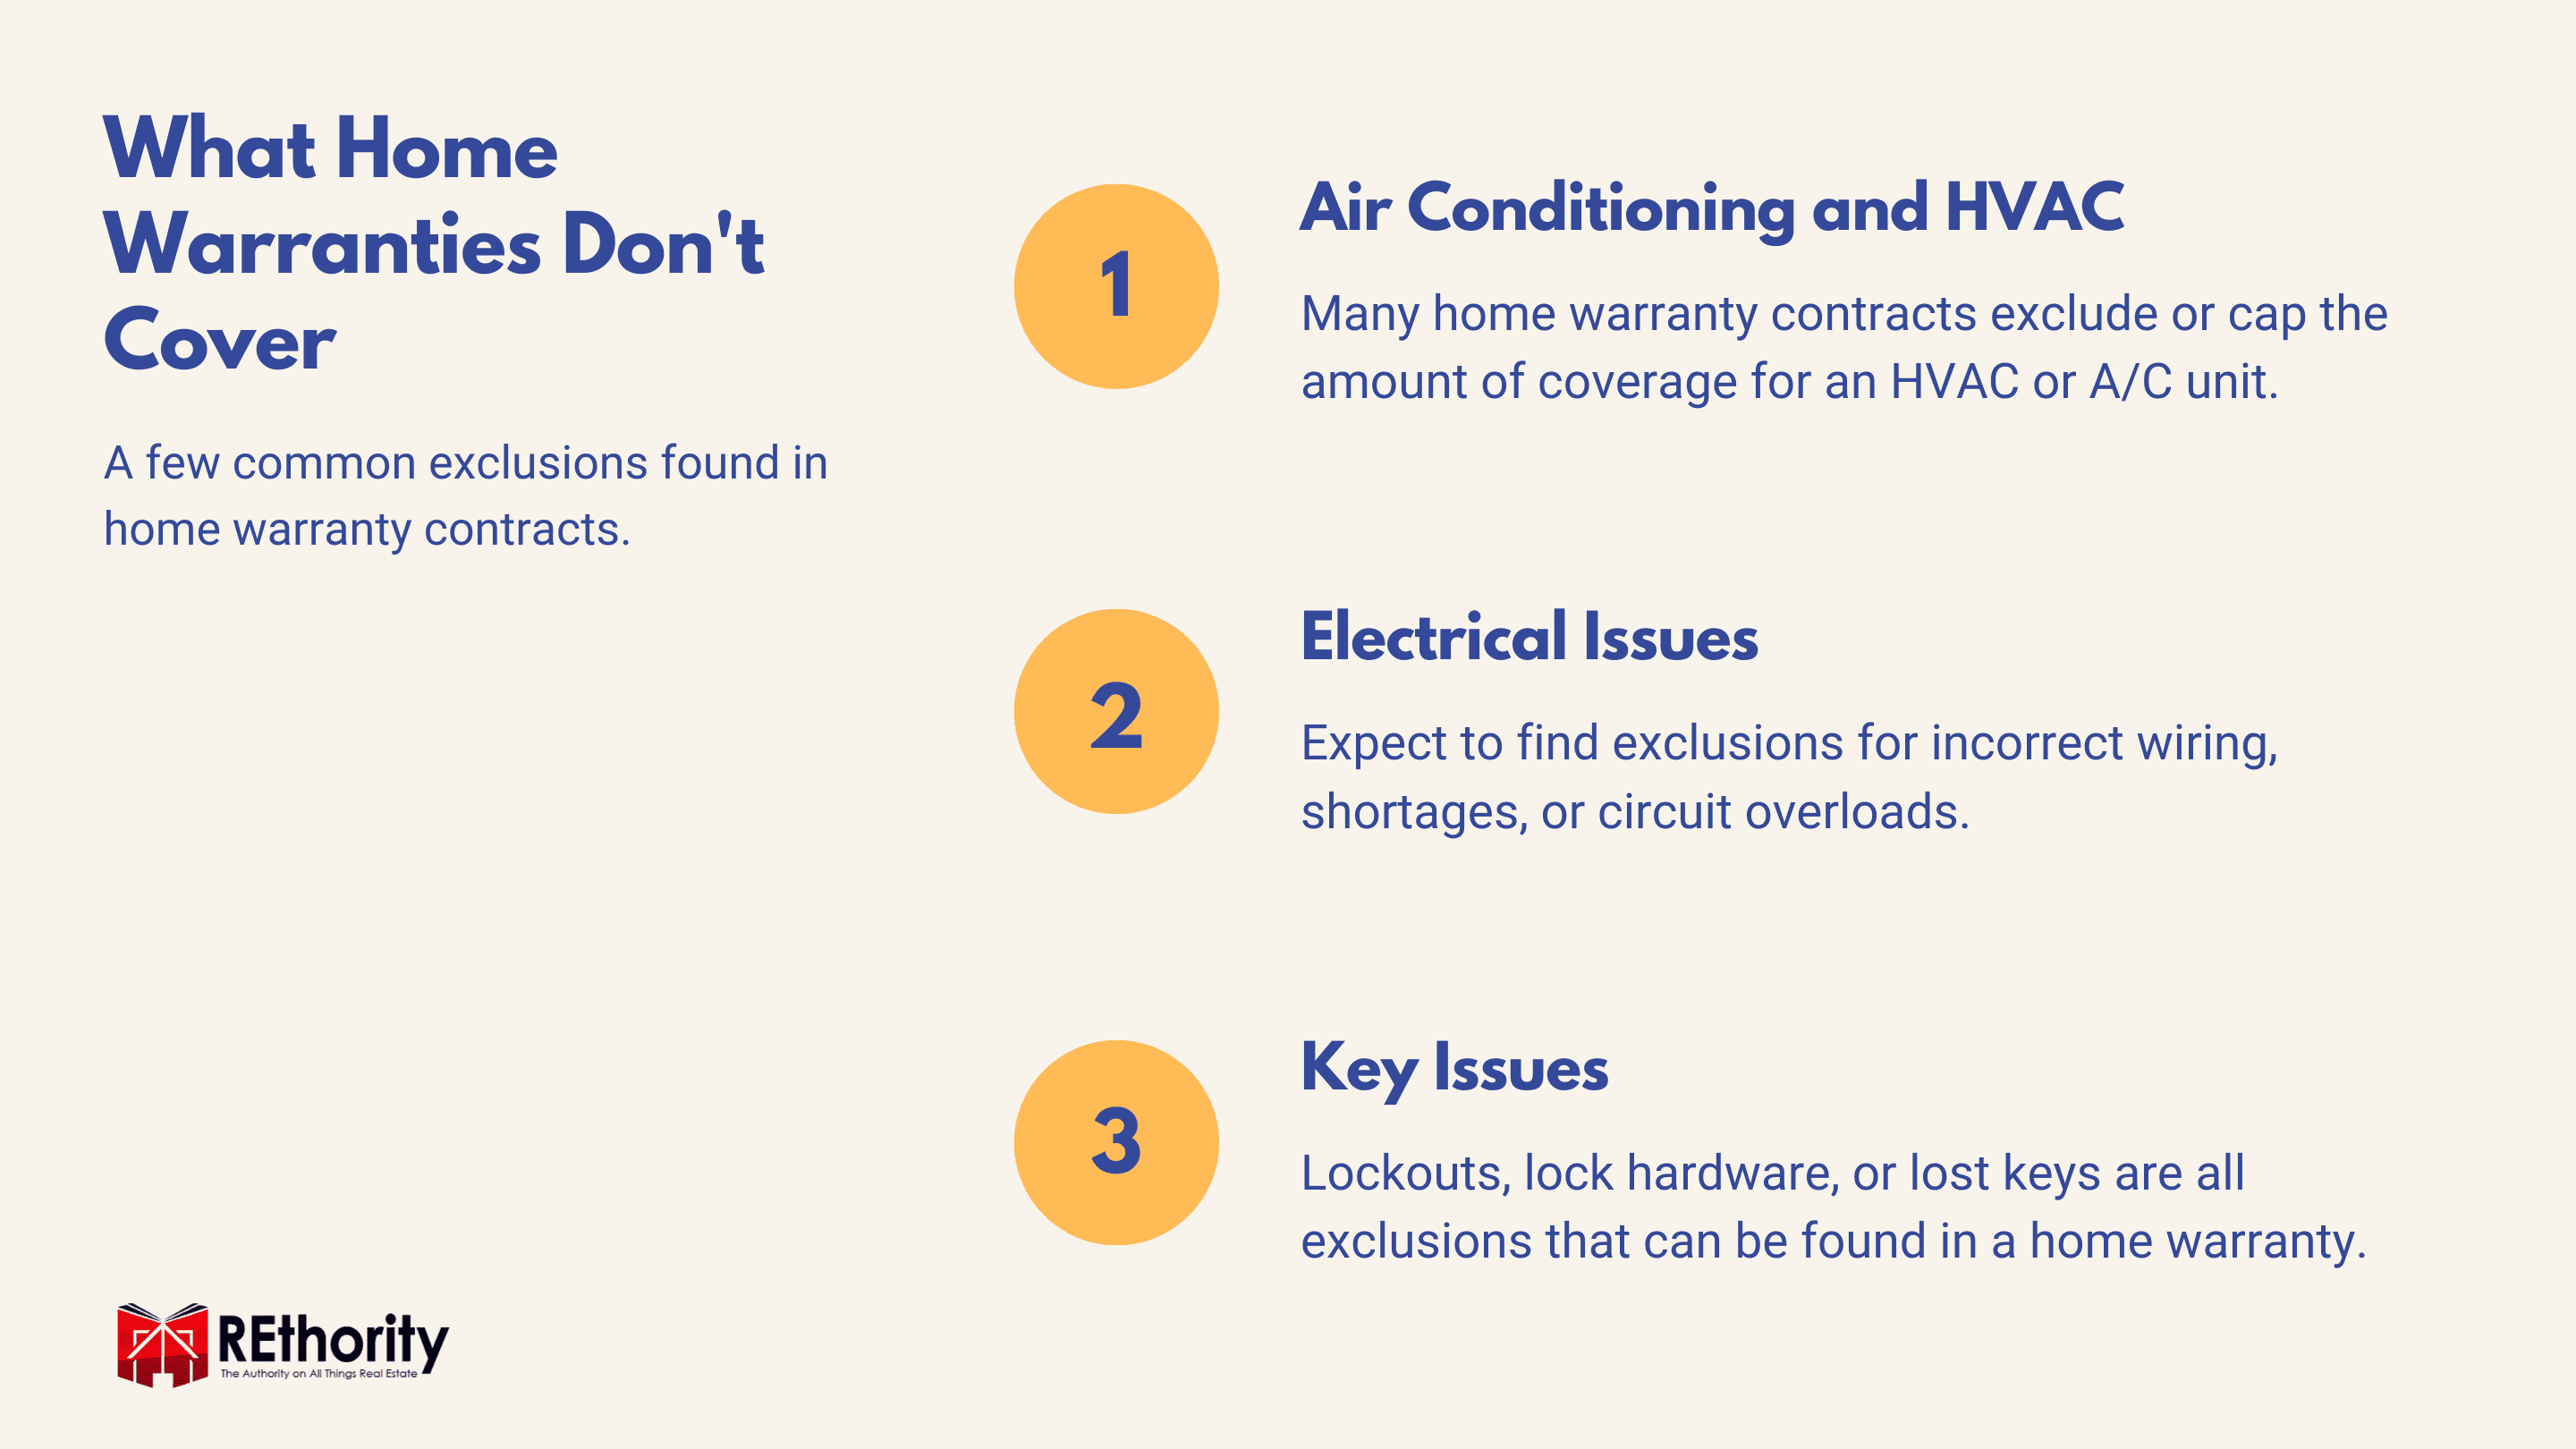 What Home Warranties Don't Cover graphic explaining three common exclusions